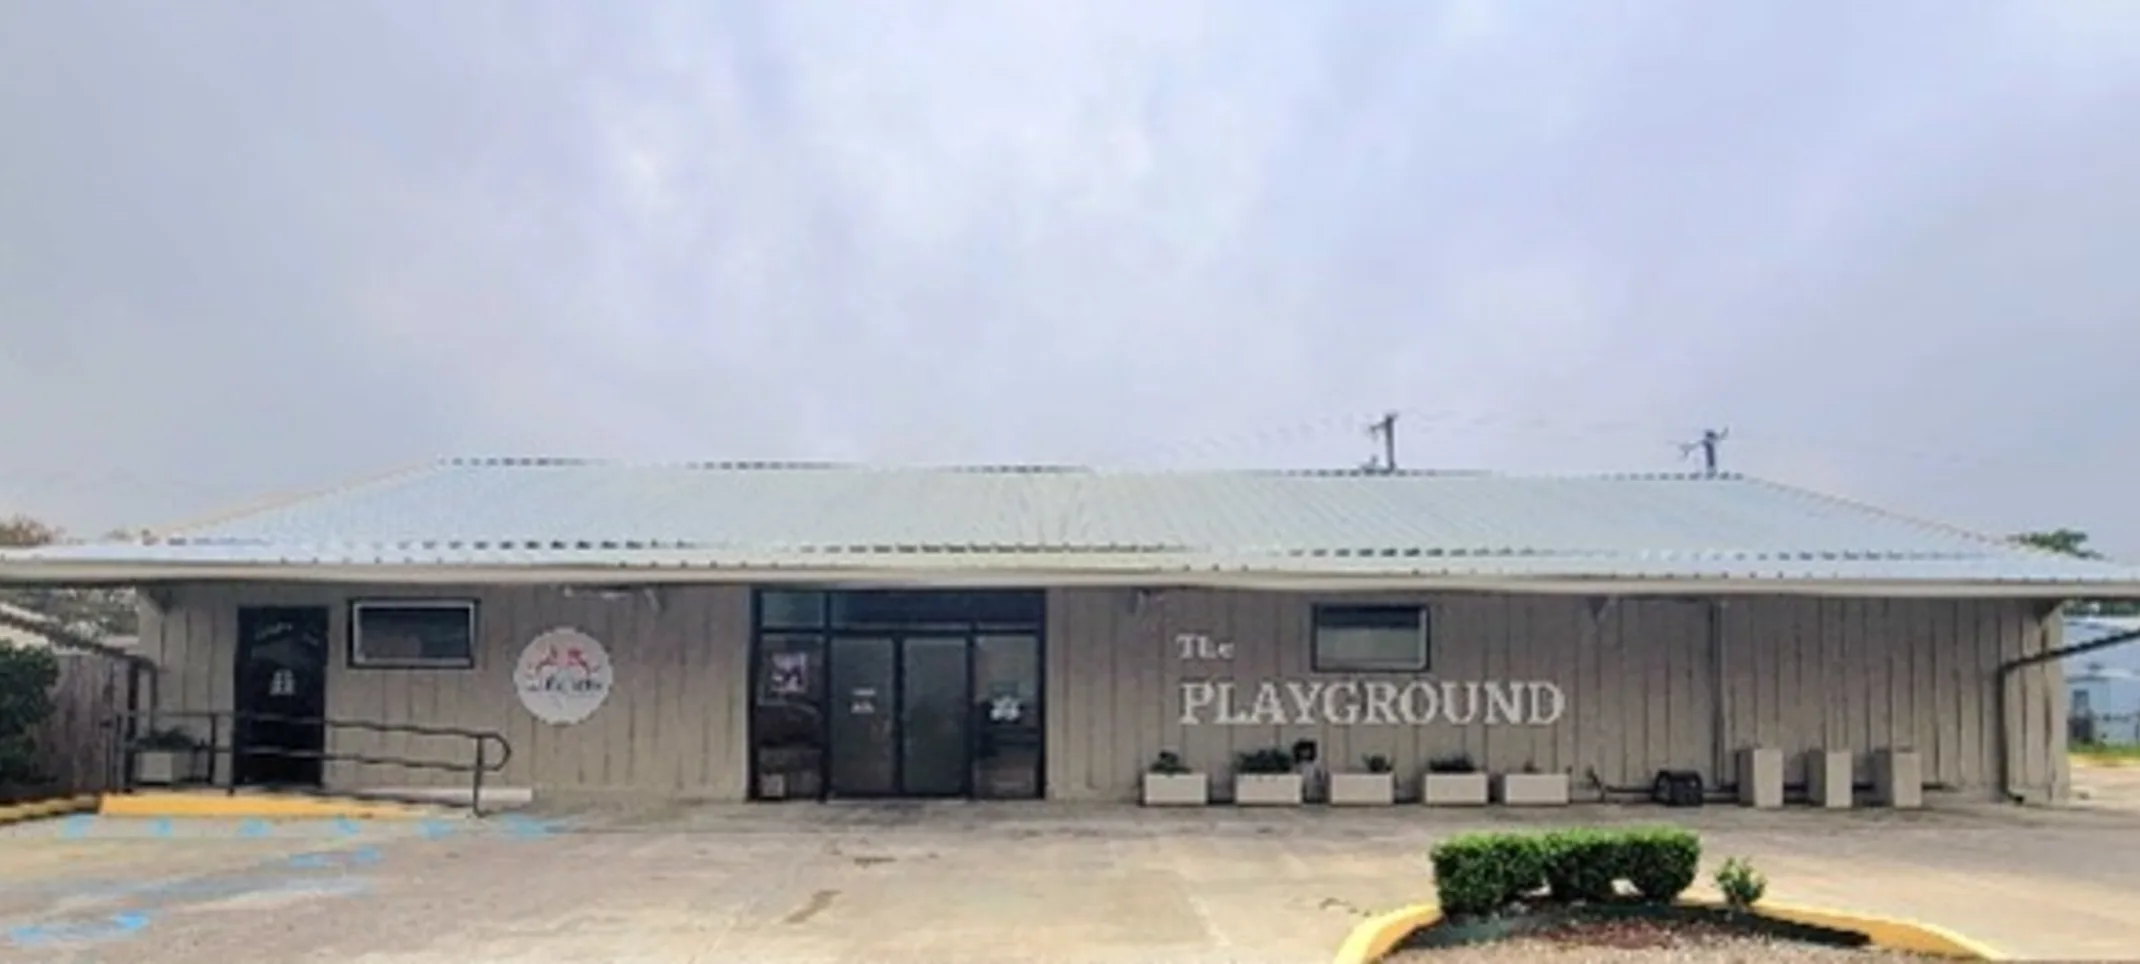 The Playground building from outside.